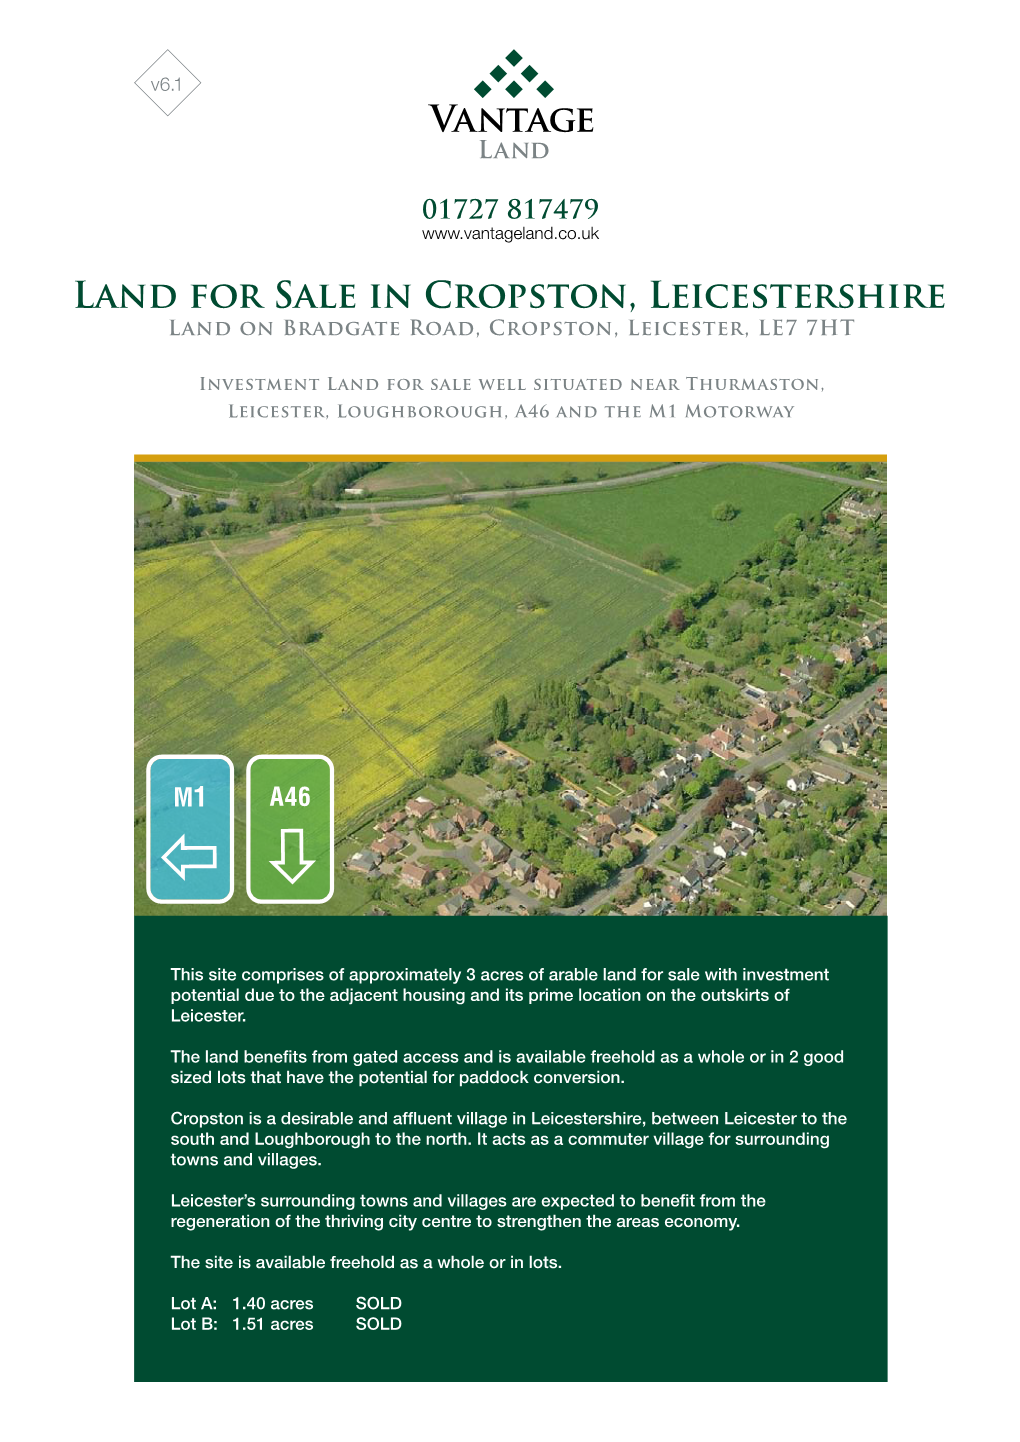 Land for Sale in Cropston, Leicestershire Land on Bradgate Road, Cropston, Leicester, LE7 7HT